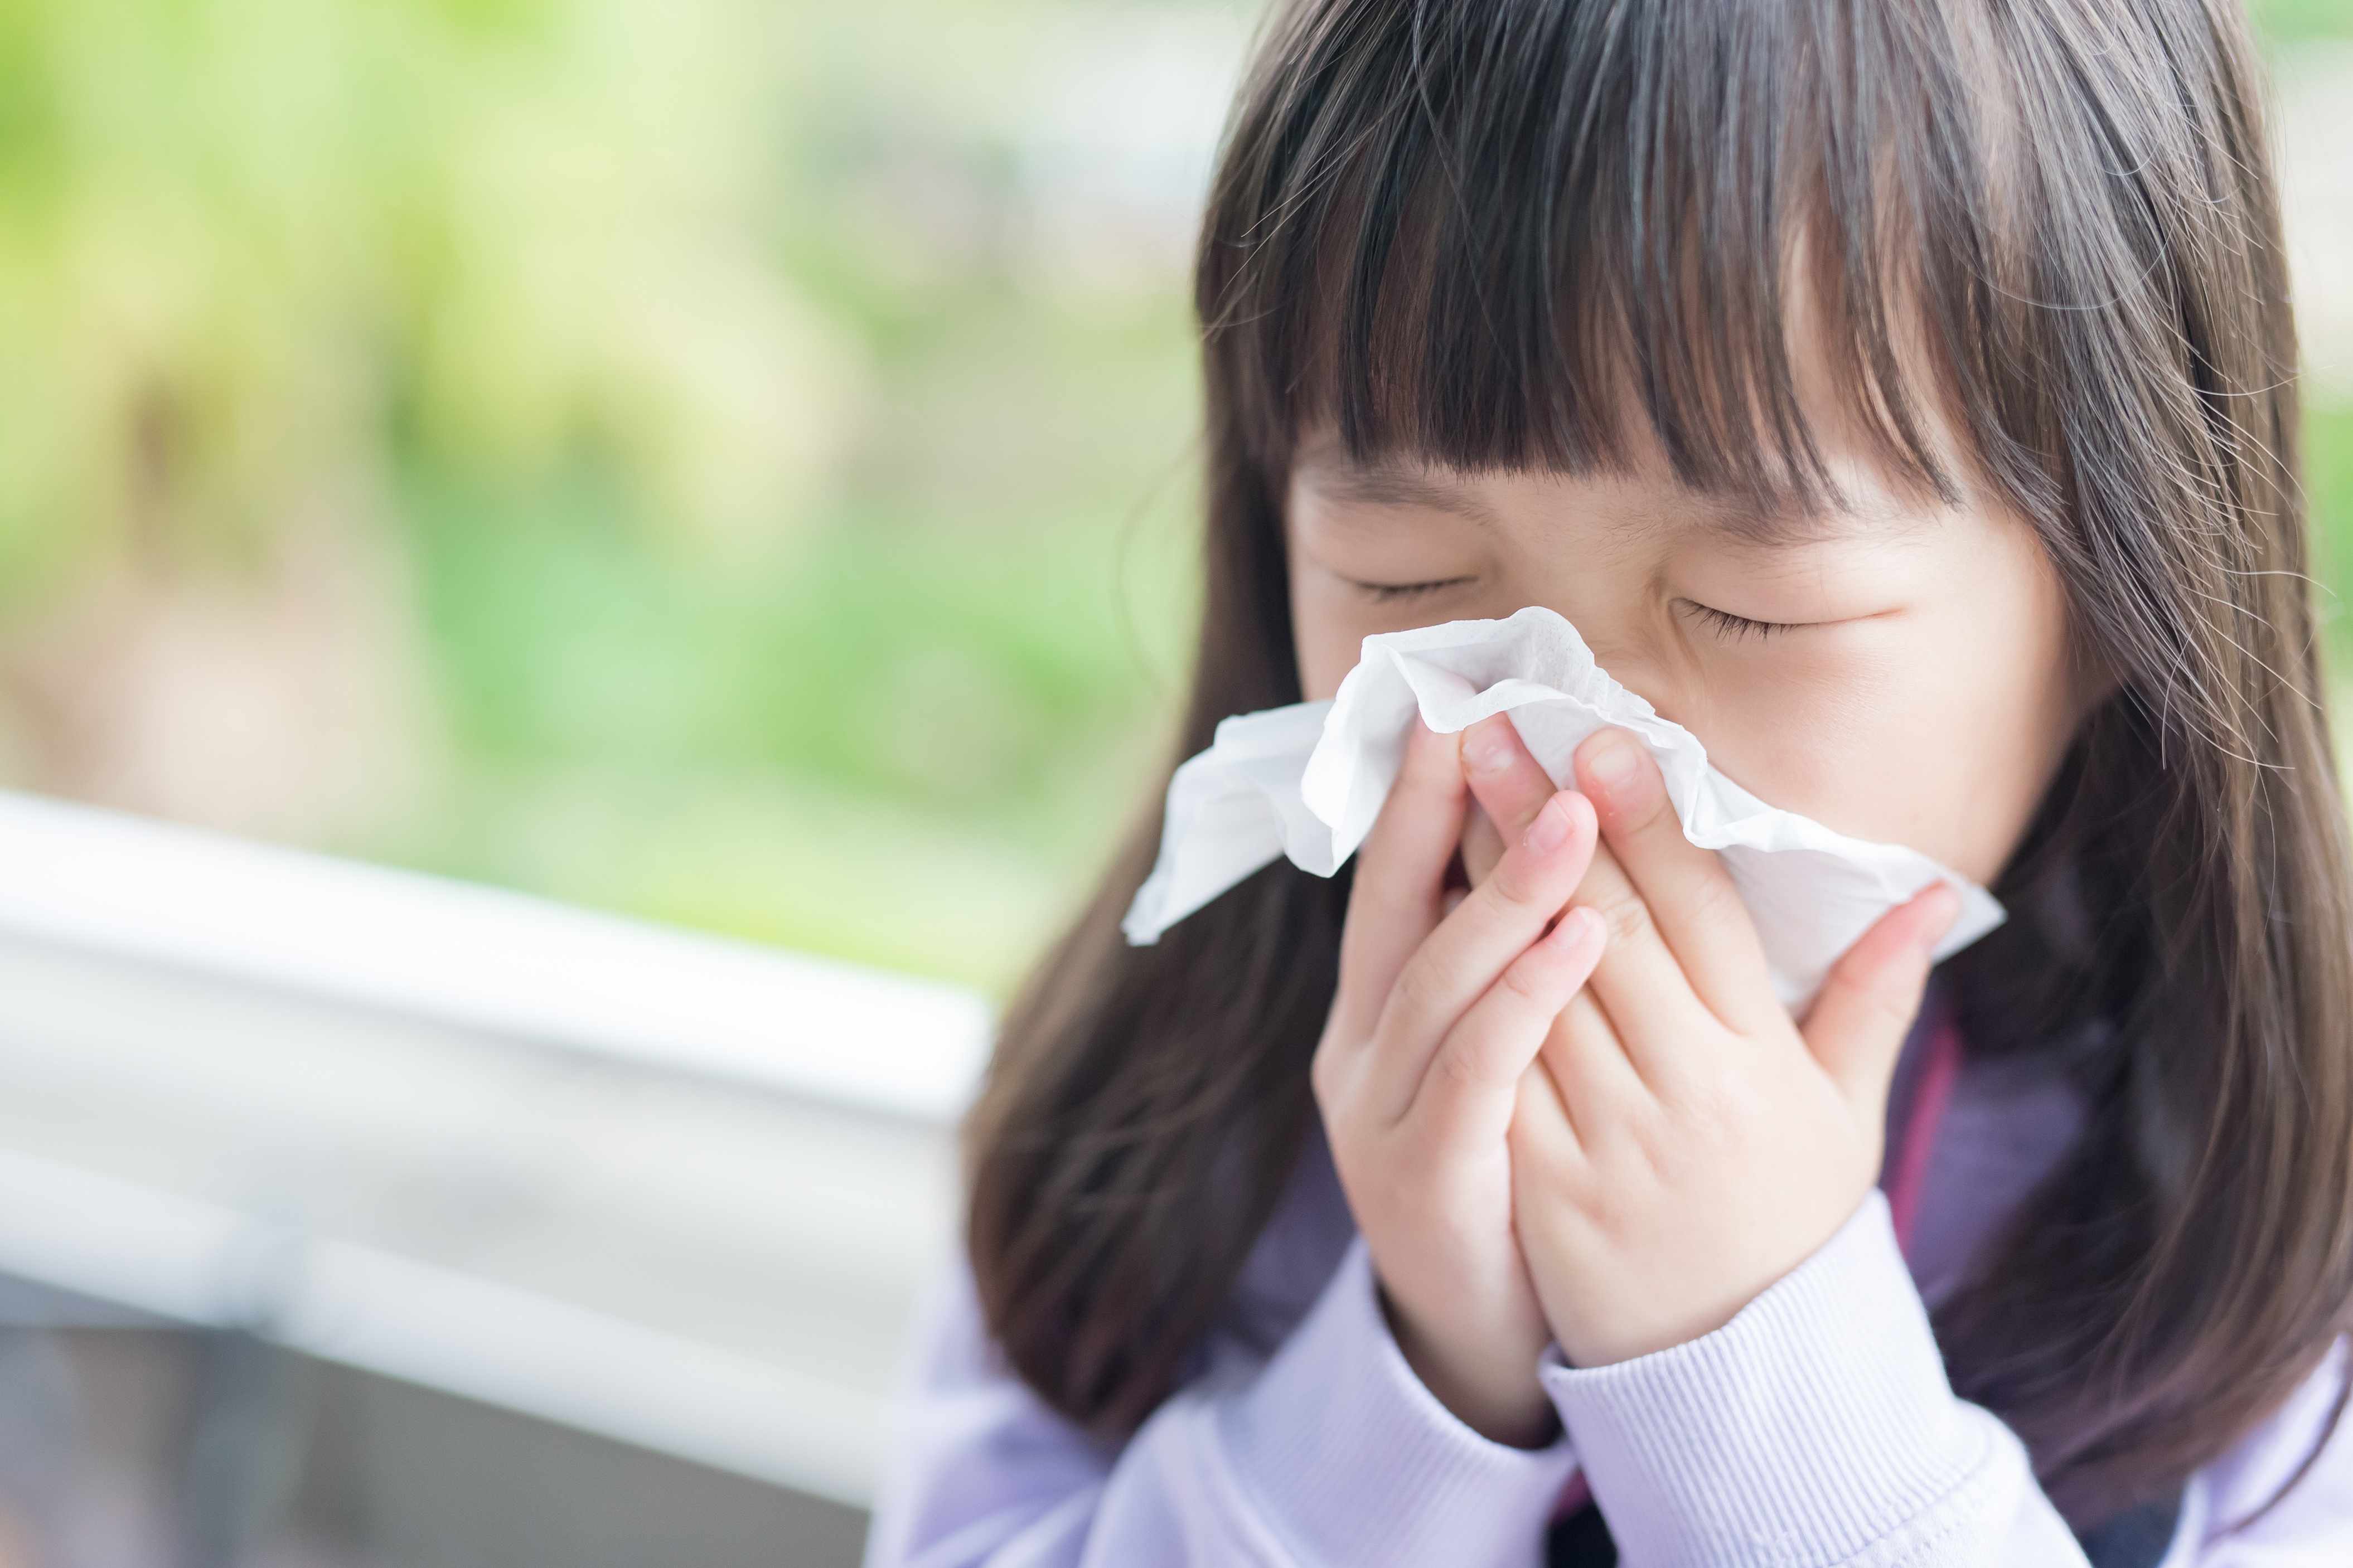 a little girl with a cold or sneezing blowing her nose into a tissue